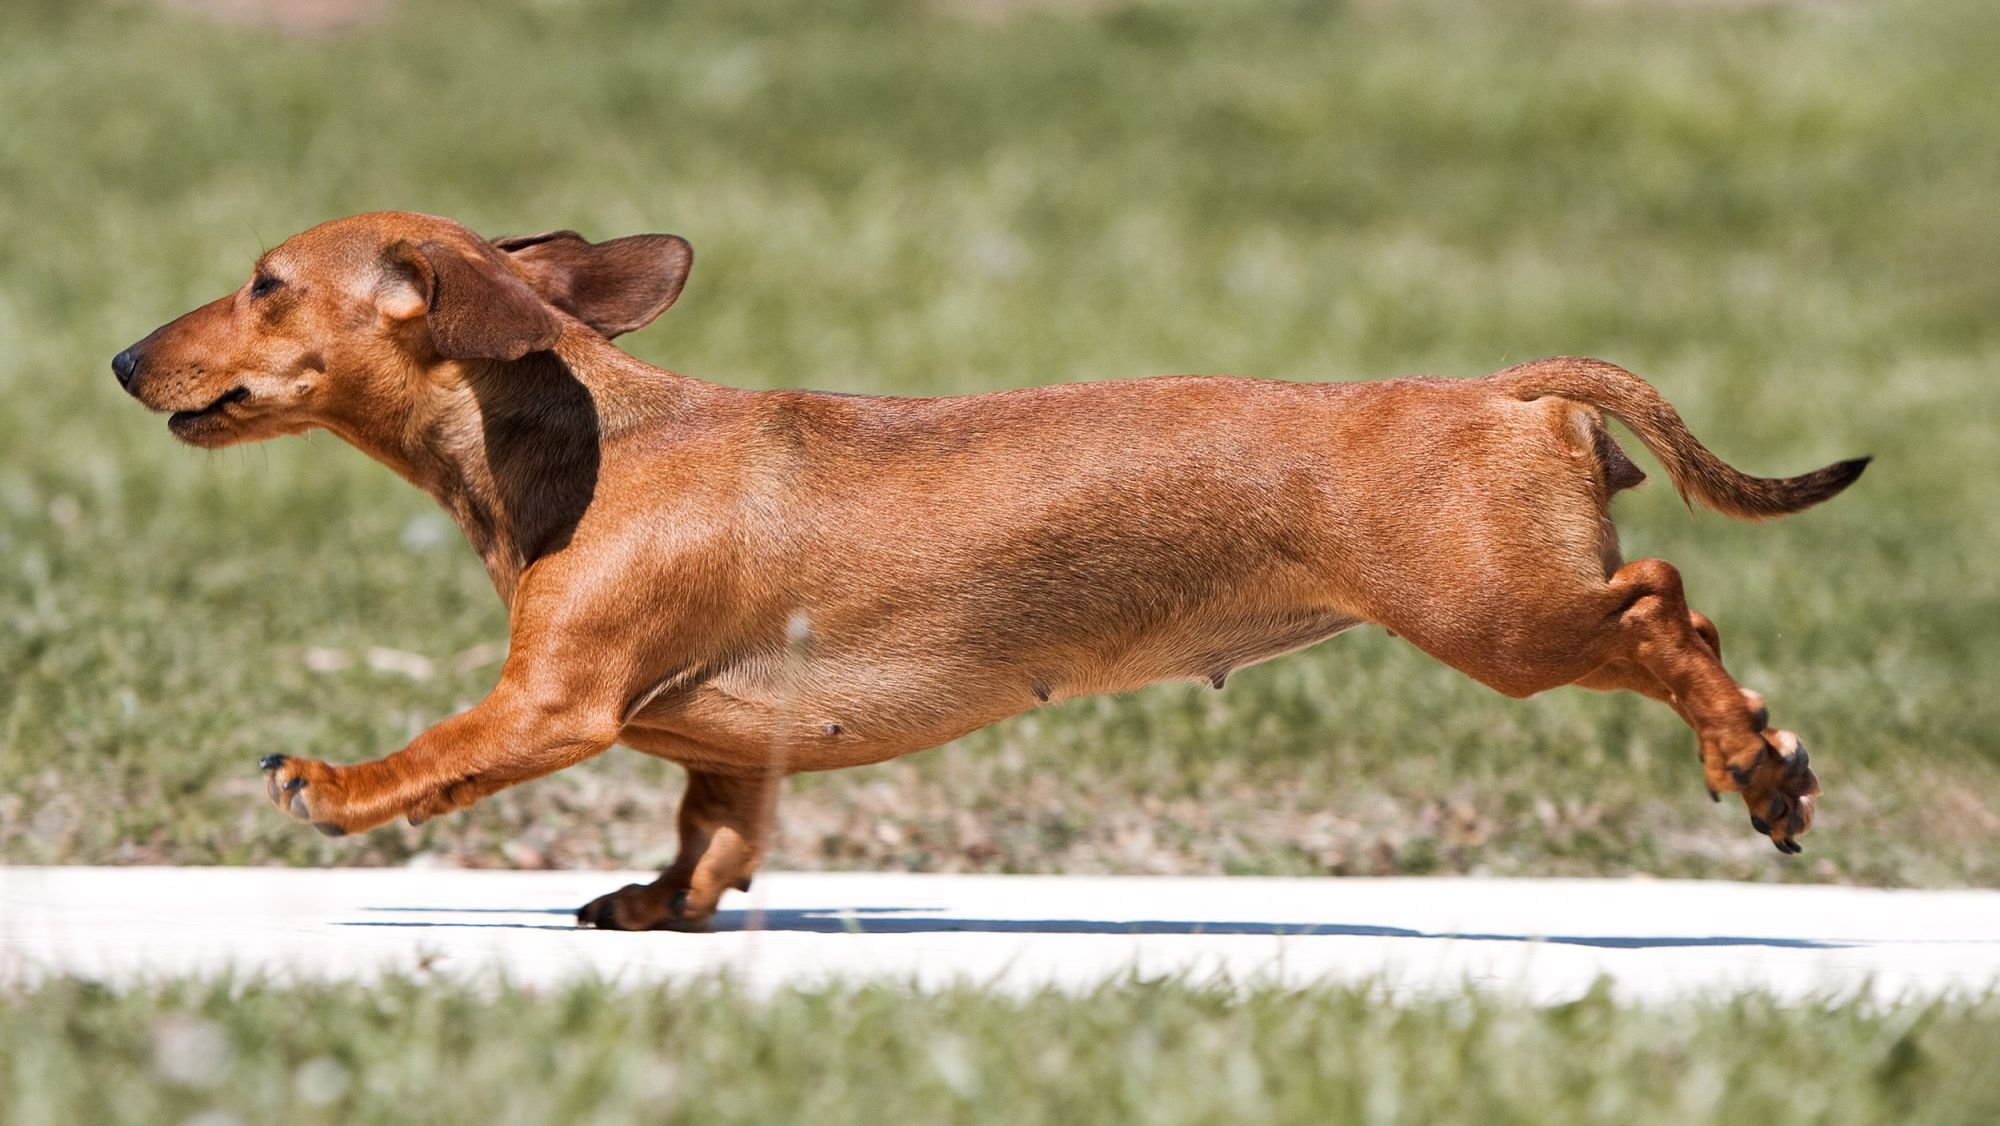 Dachshund adult running on a pavement outside